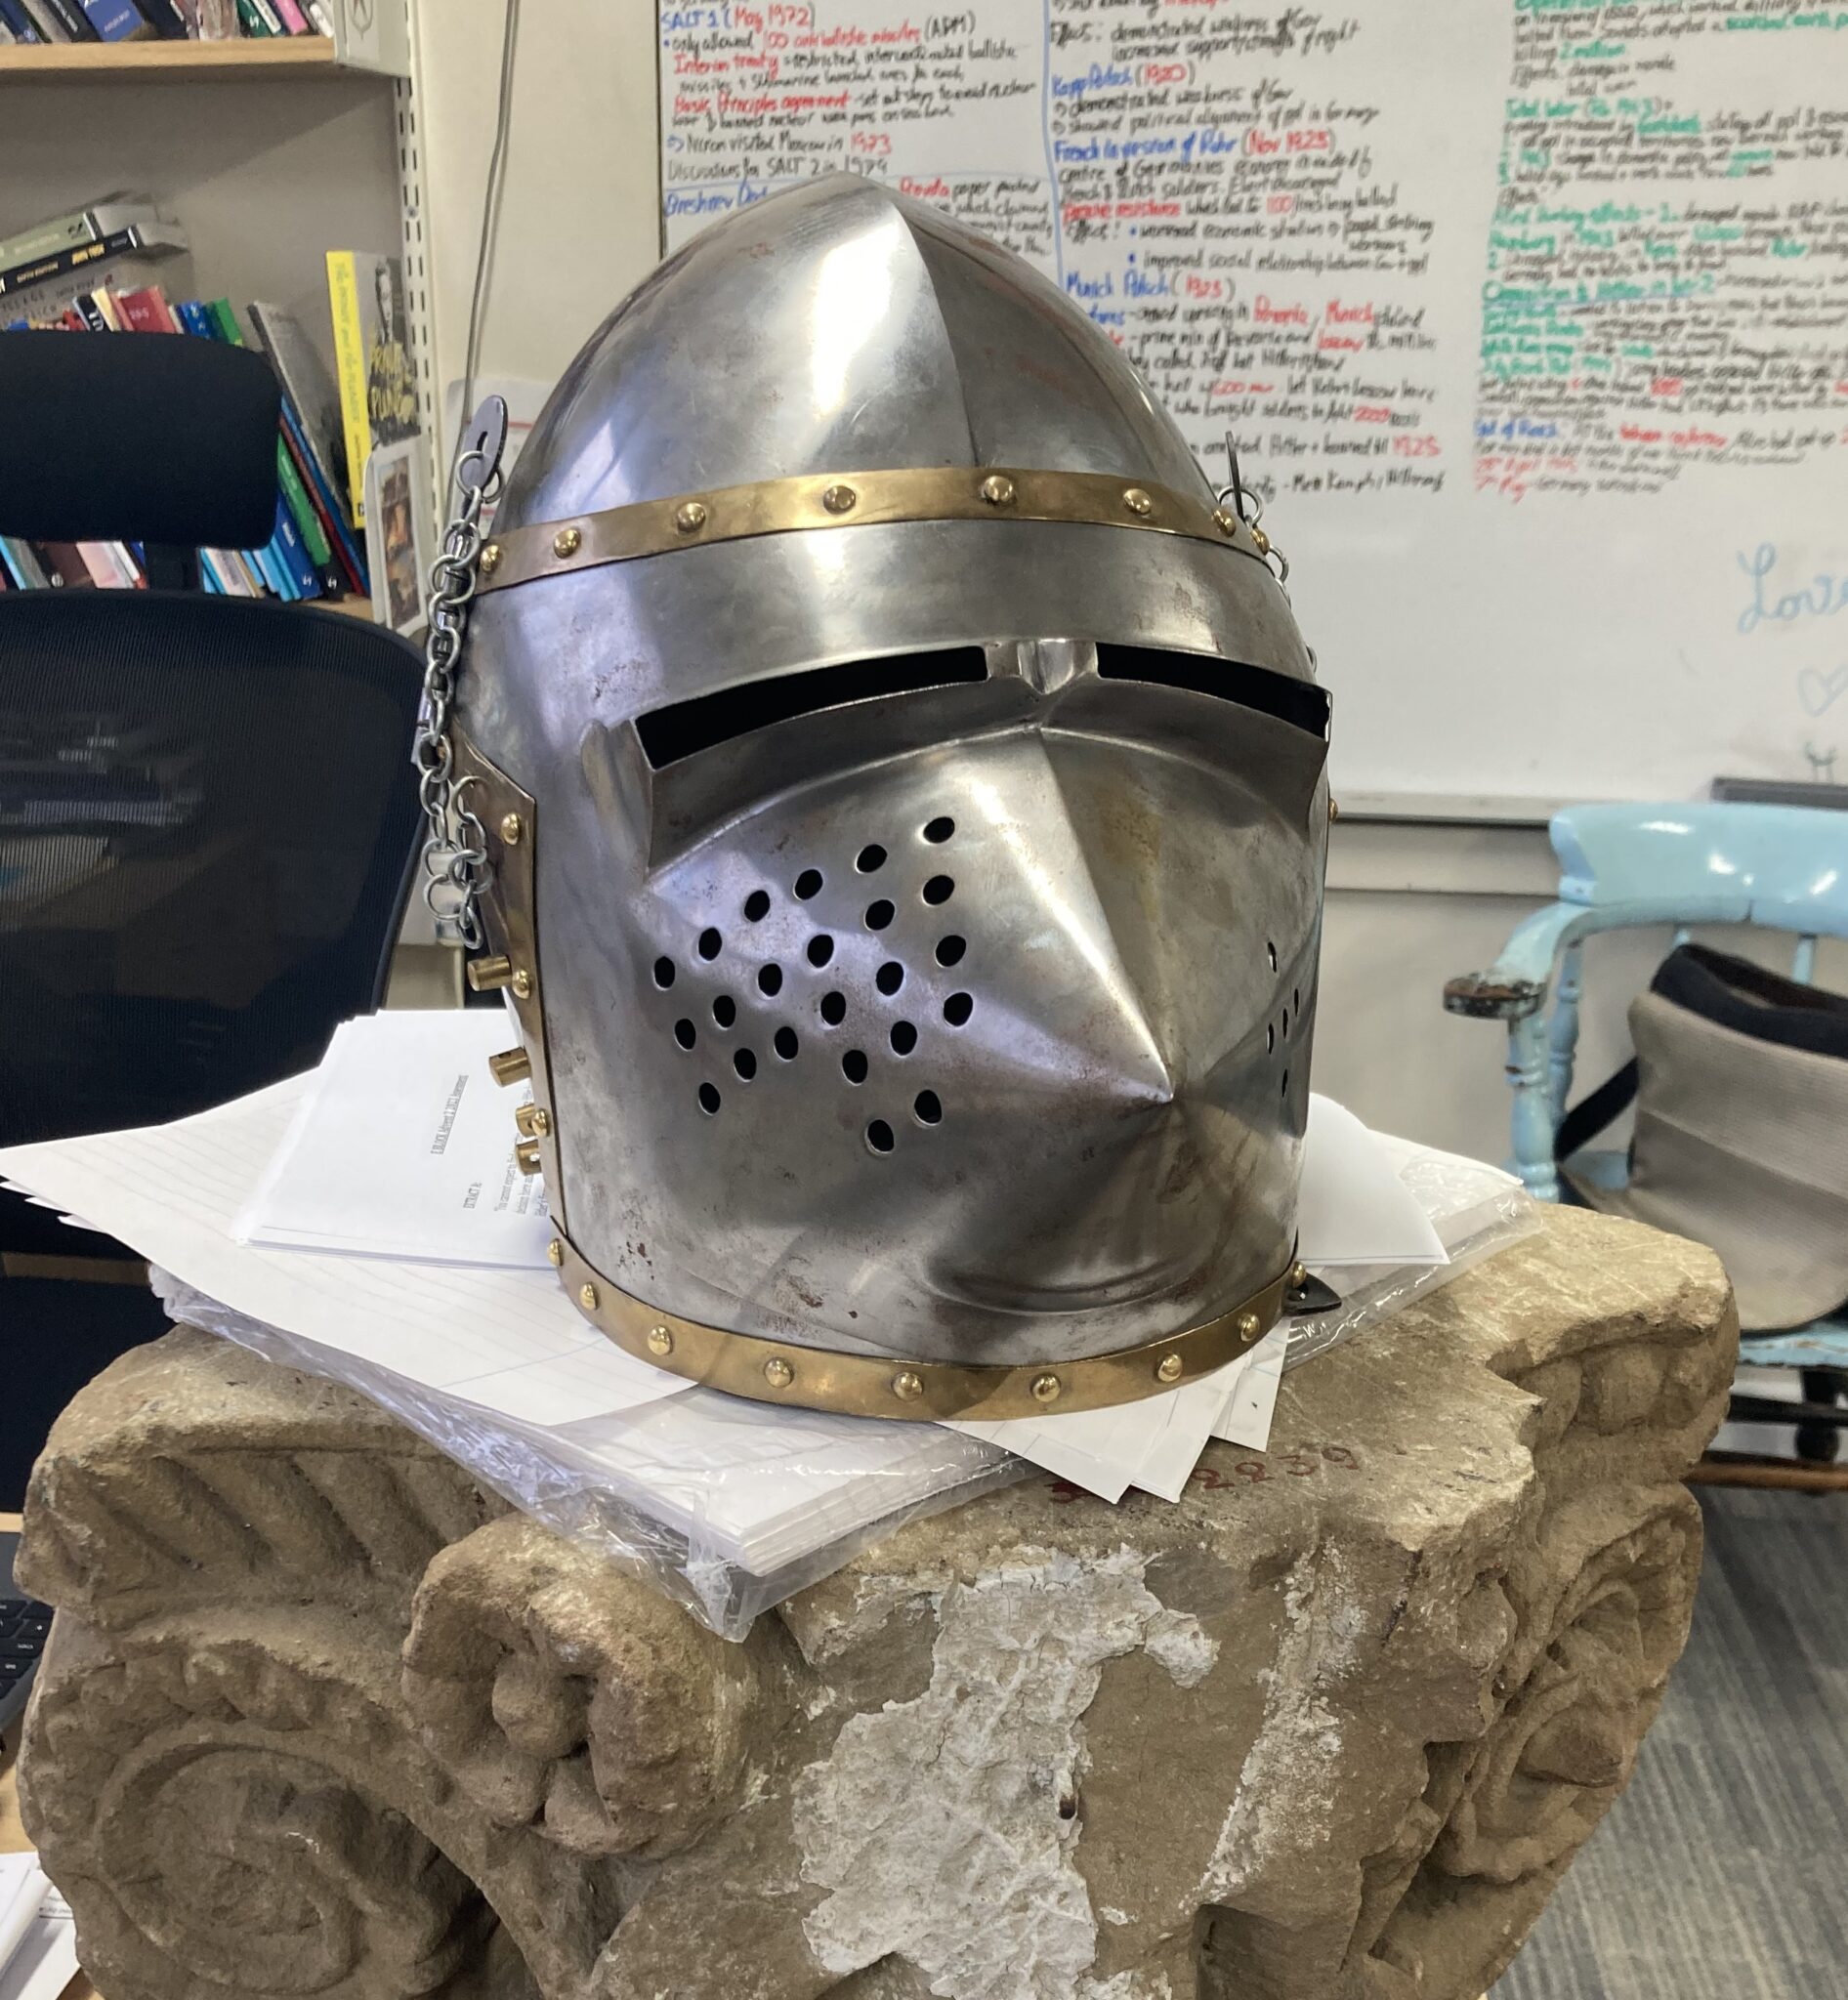 Knight’s helmet challenge for sixth form candidates